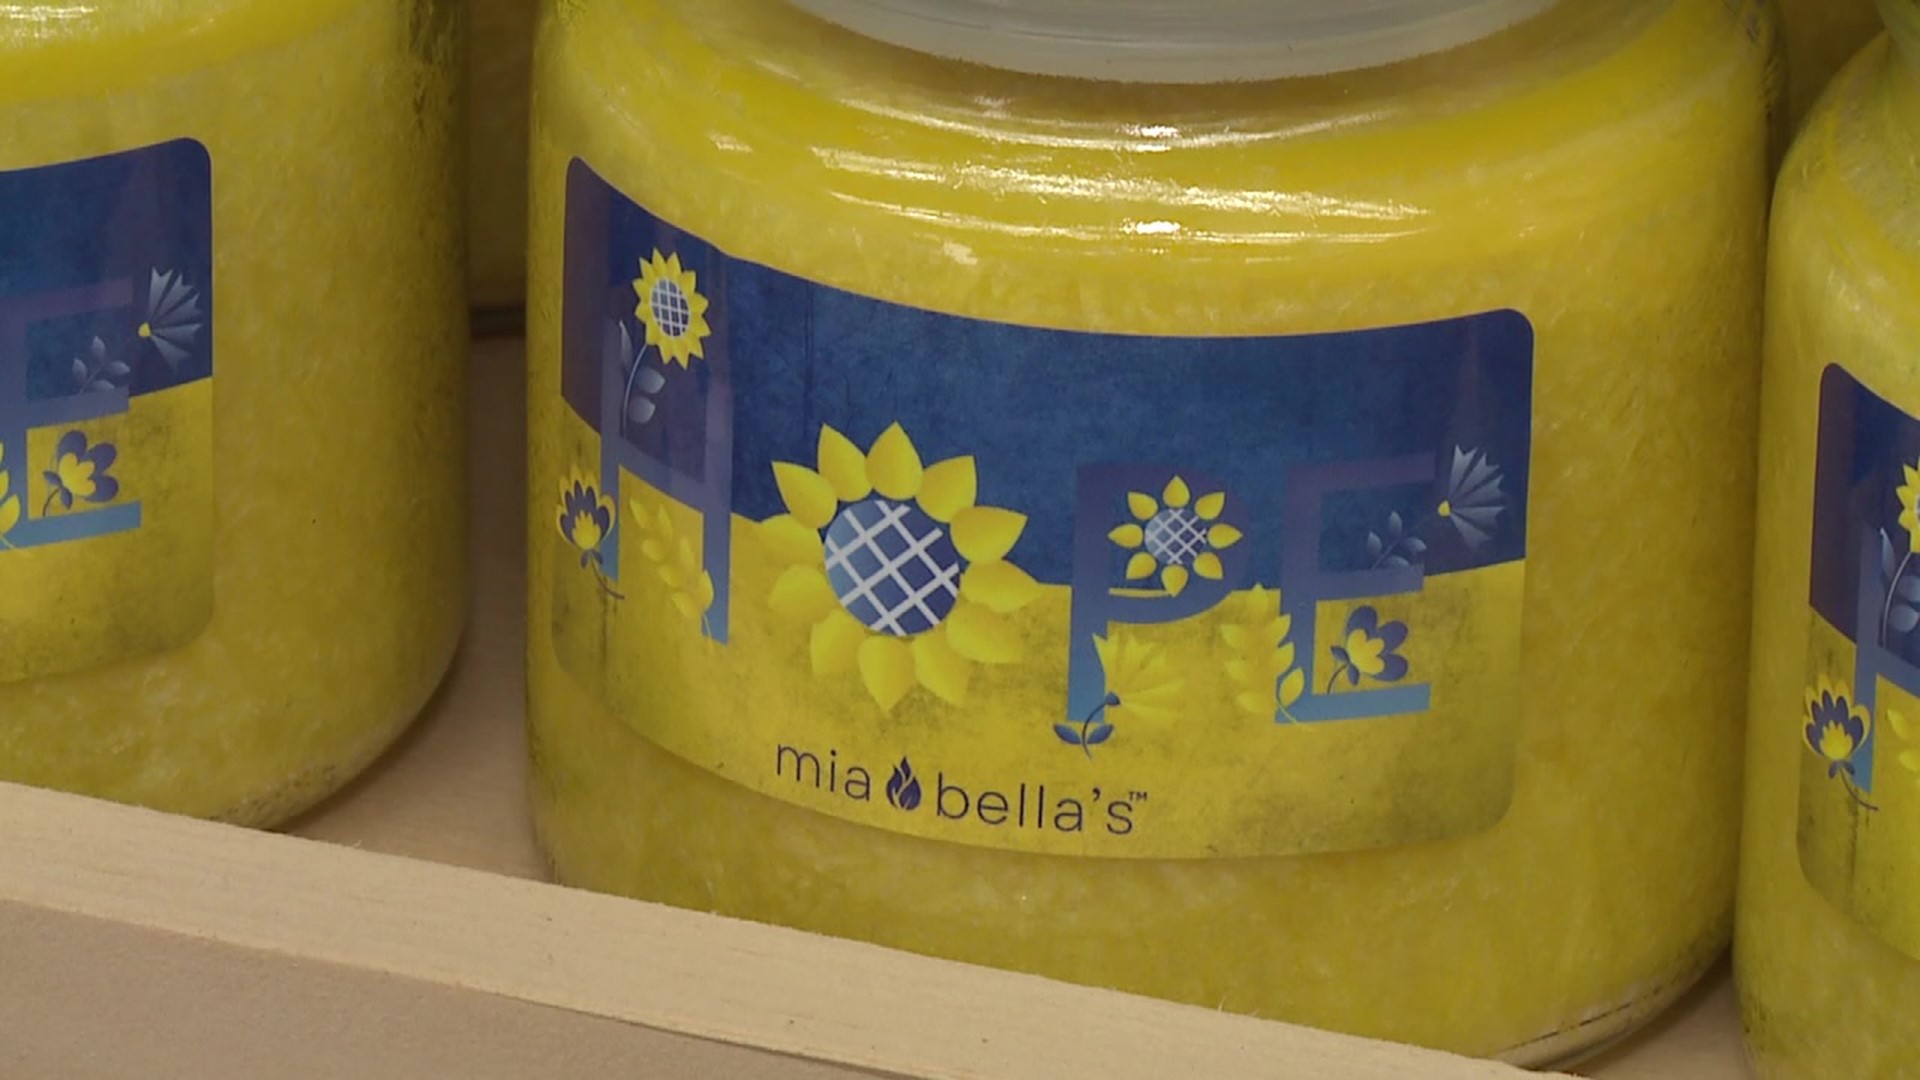 Scent-Sations in Wilkes-Barre is joining the effort to help people in Ukraine with a sunflower scented candle.